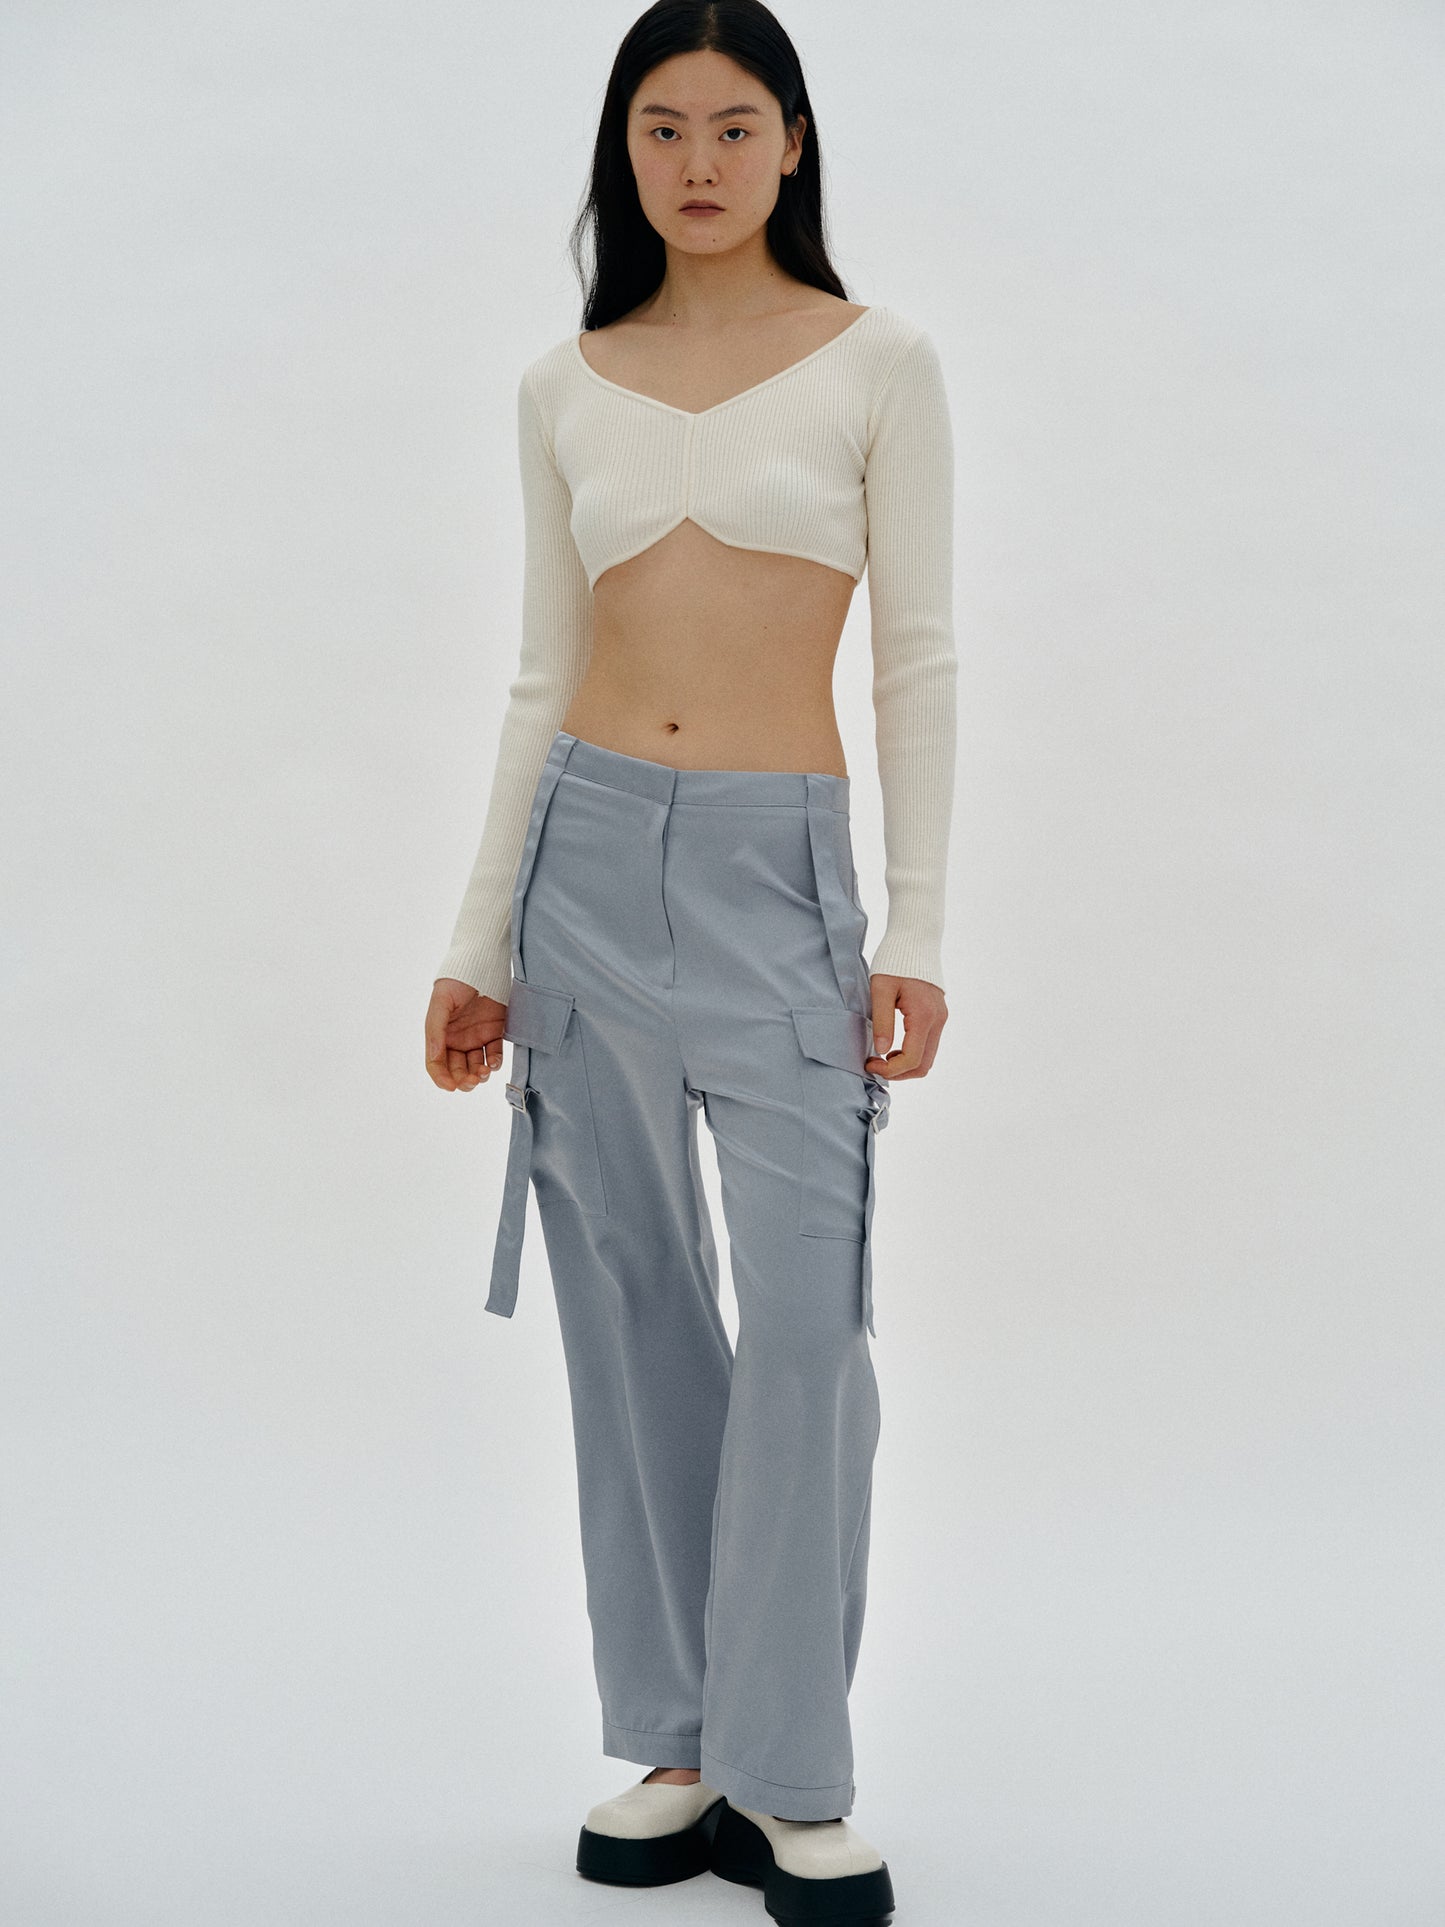 Butterfly Cropped Knit, Ivory